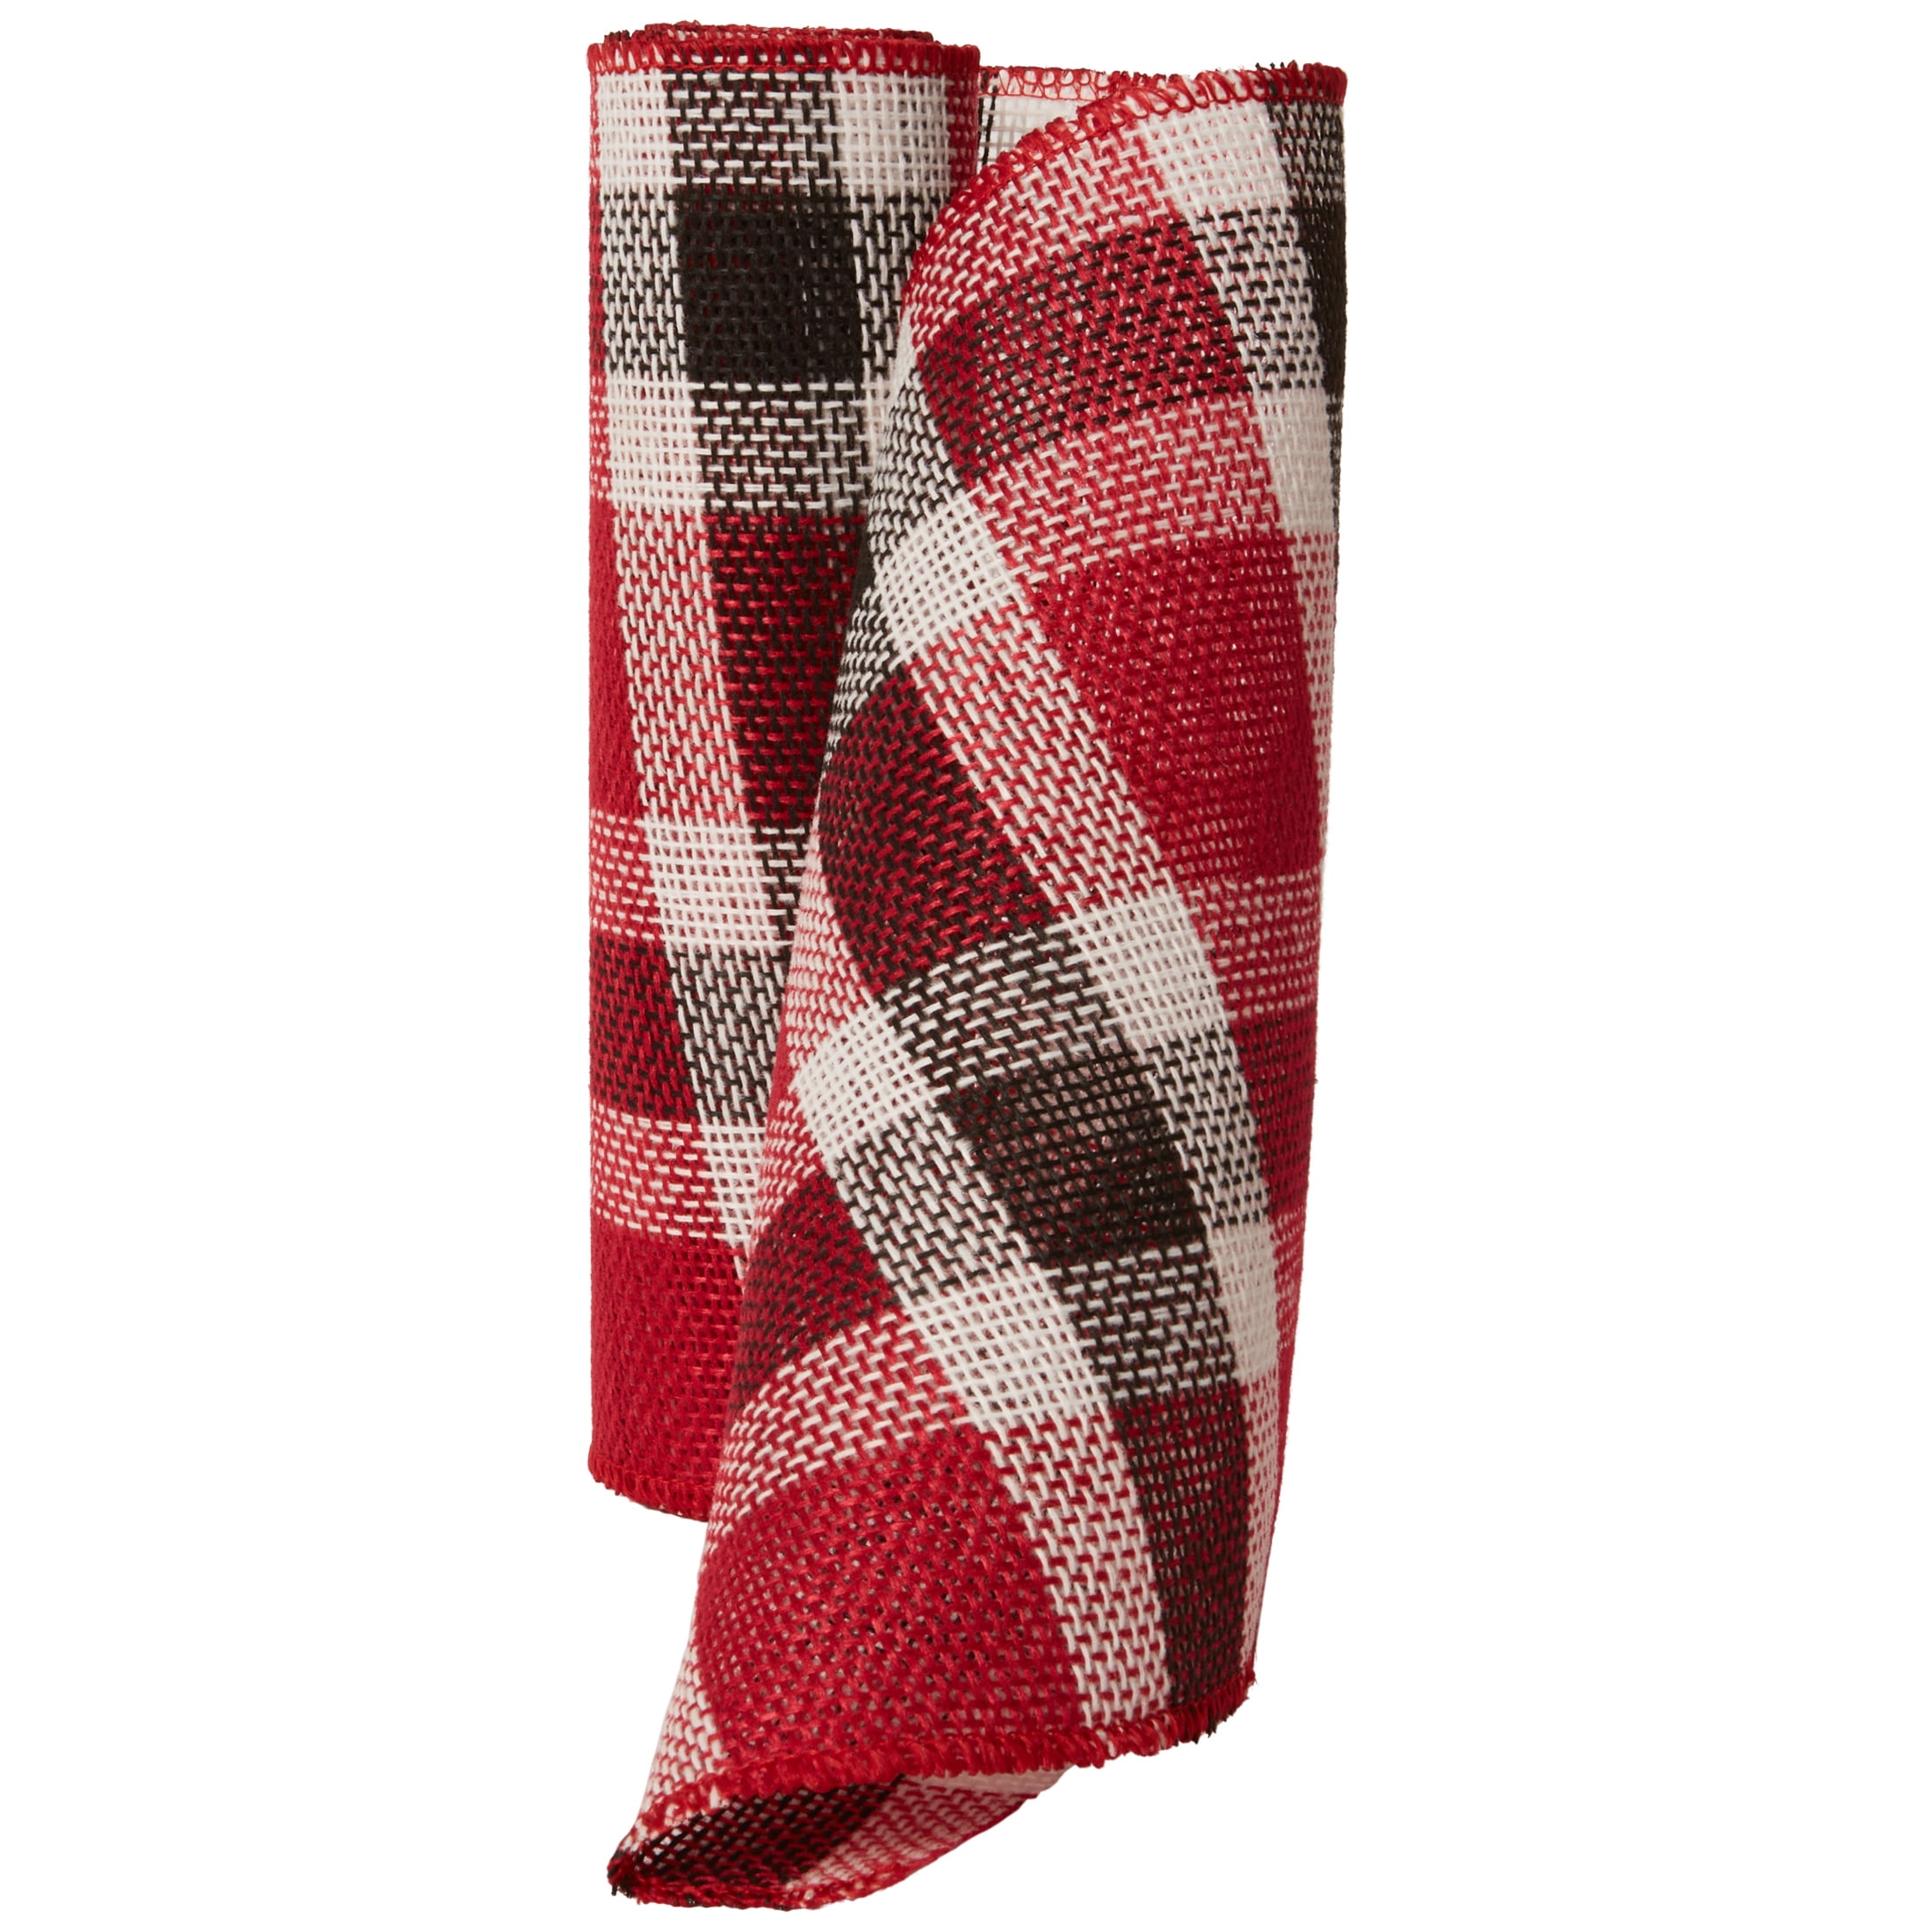 Red/White Plaid Fabric Roll Ribbon, 10.5 in, by Holiday Time - Walmart.com